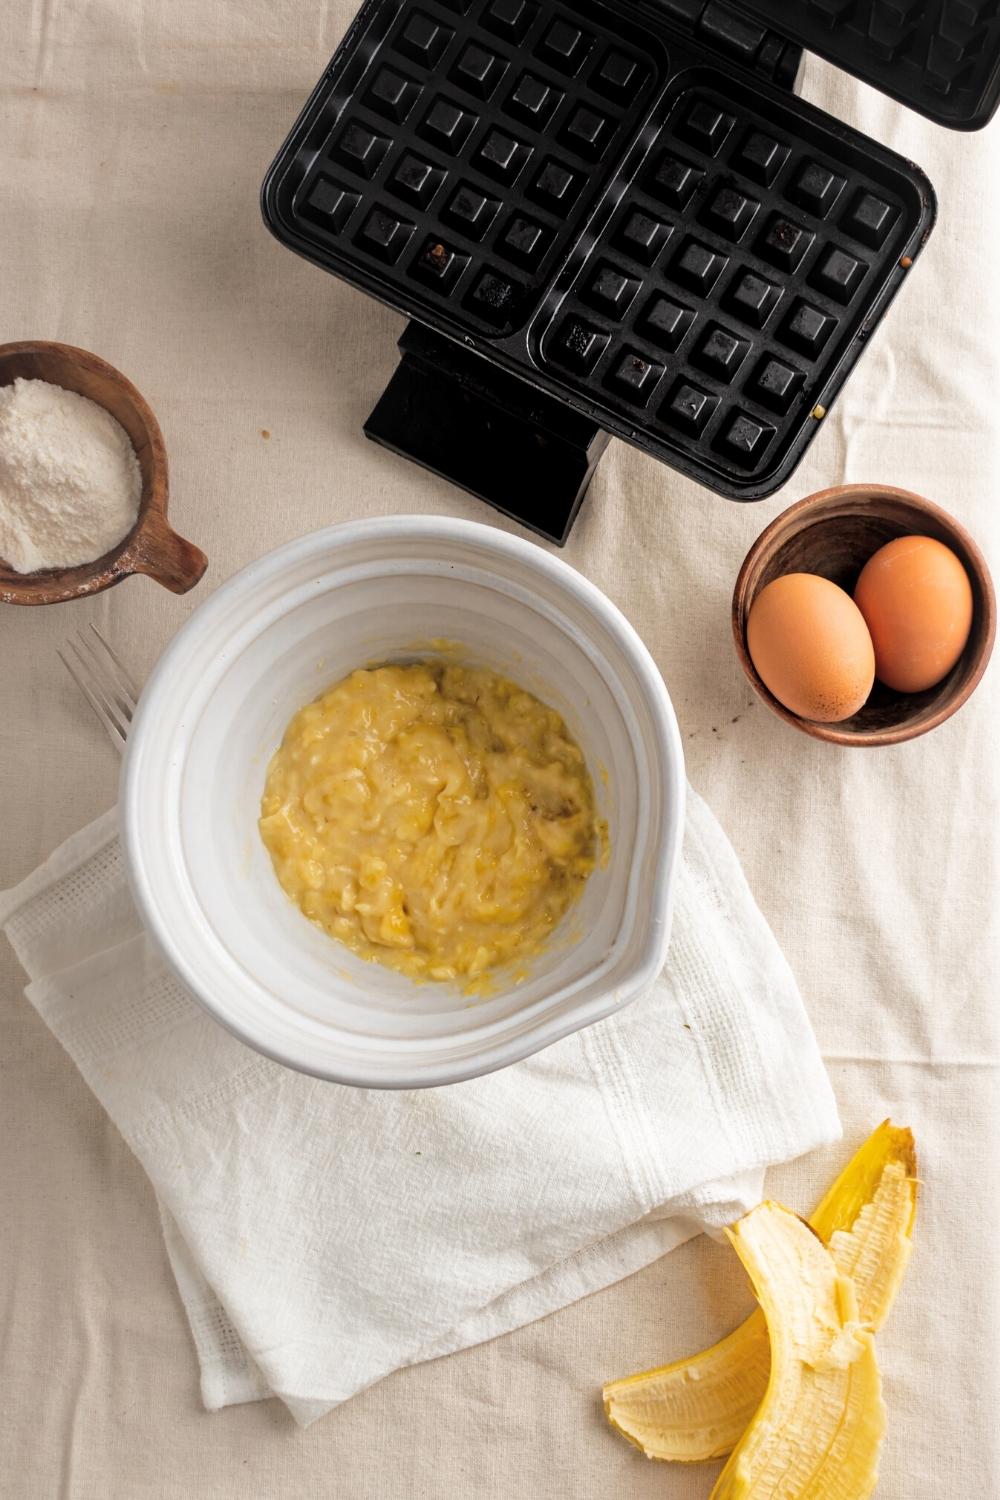 Mashed bananas in a bowl, two eggs in a small bowl, a small bowl of coconut flour, and part of a waffle iron on a white tablecloth.